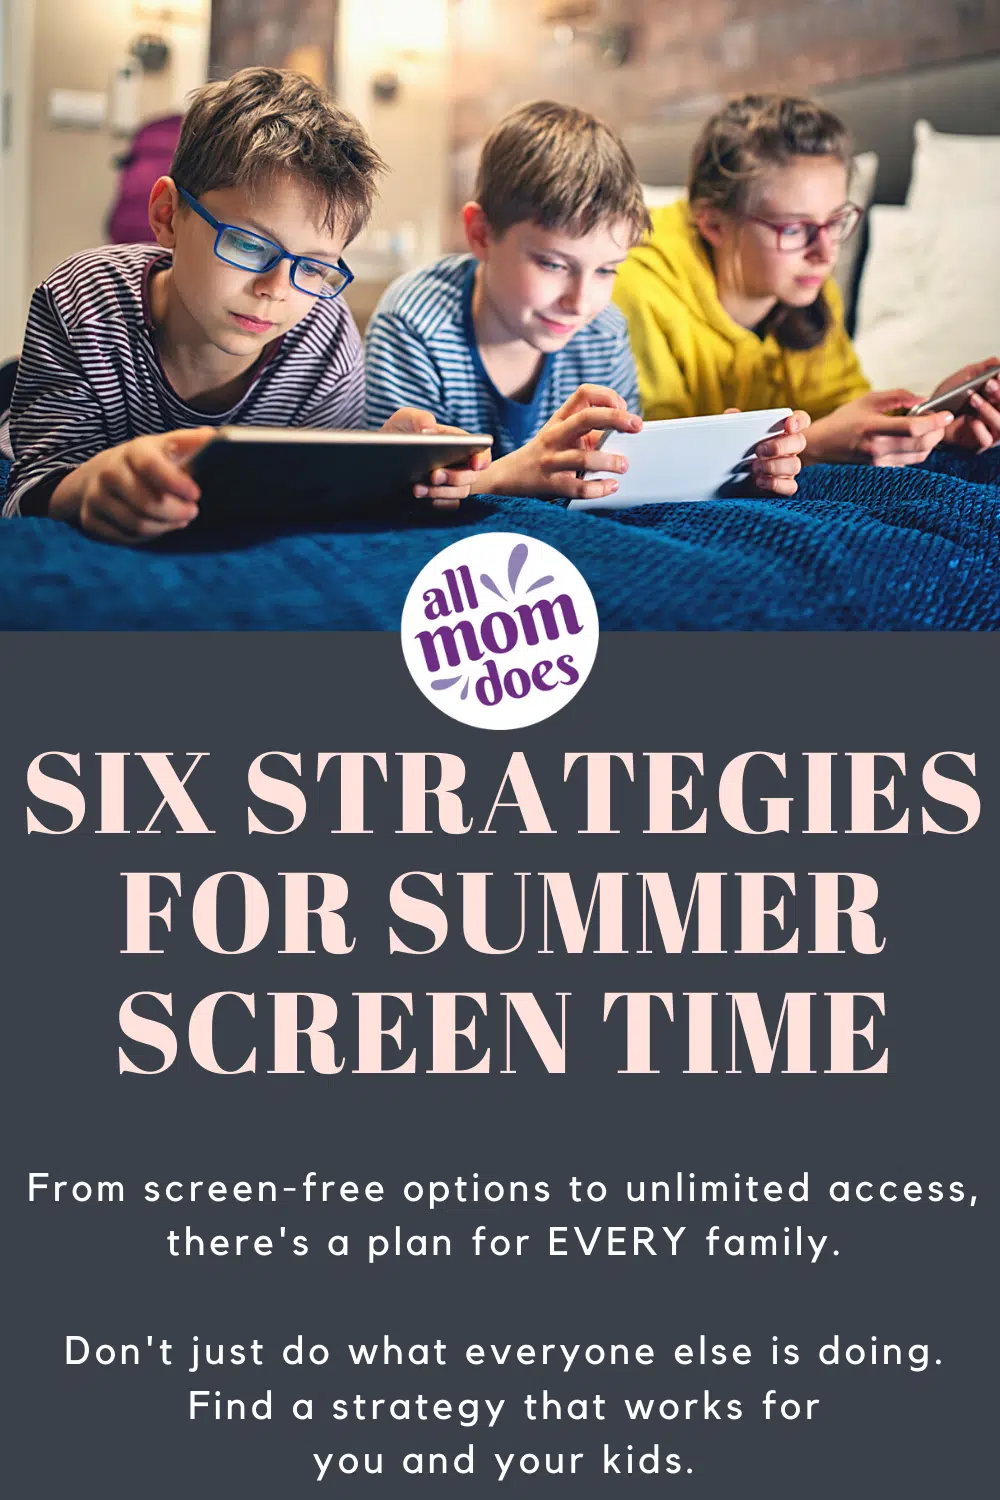 Summer screen time management options and screen time ideas for kids.